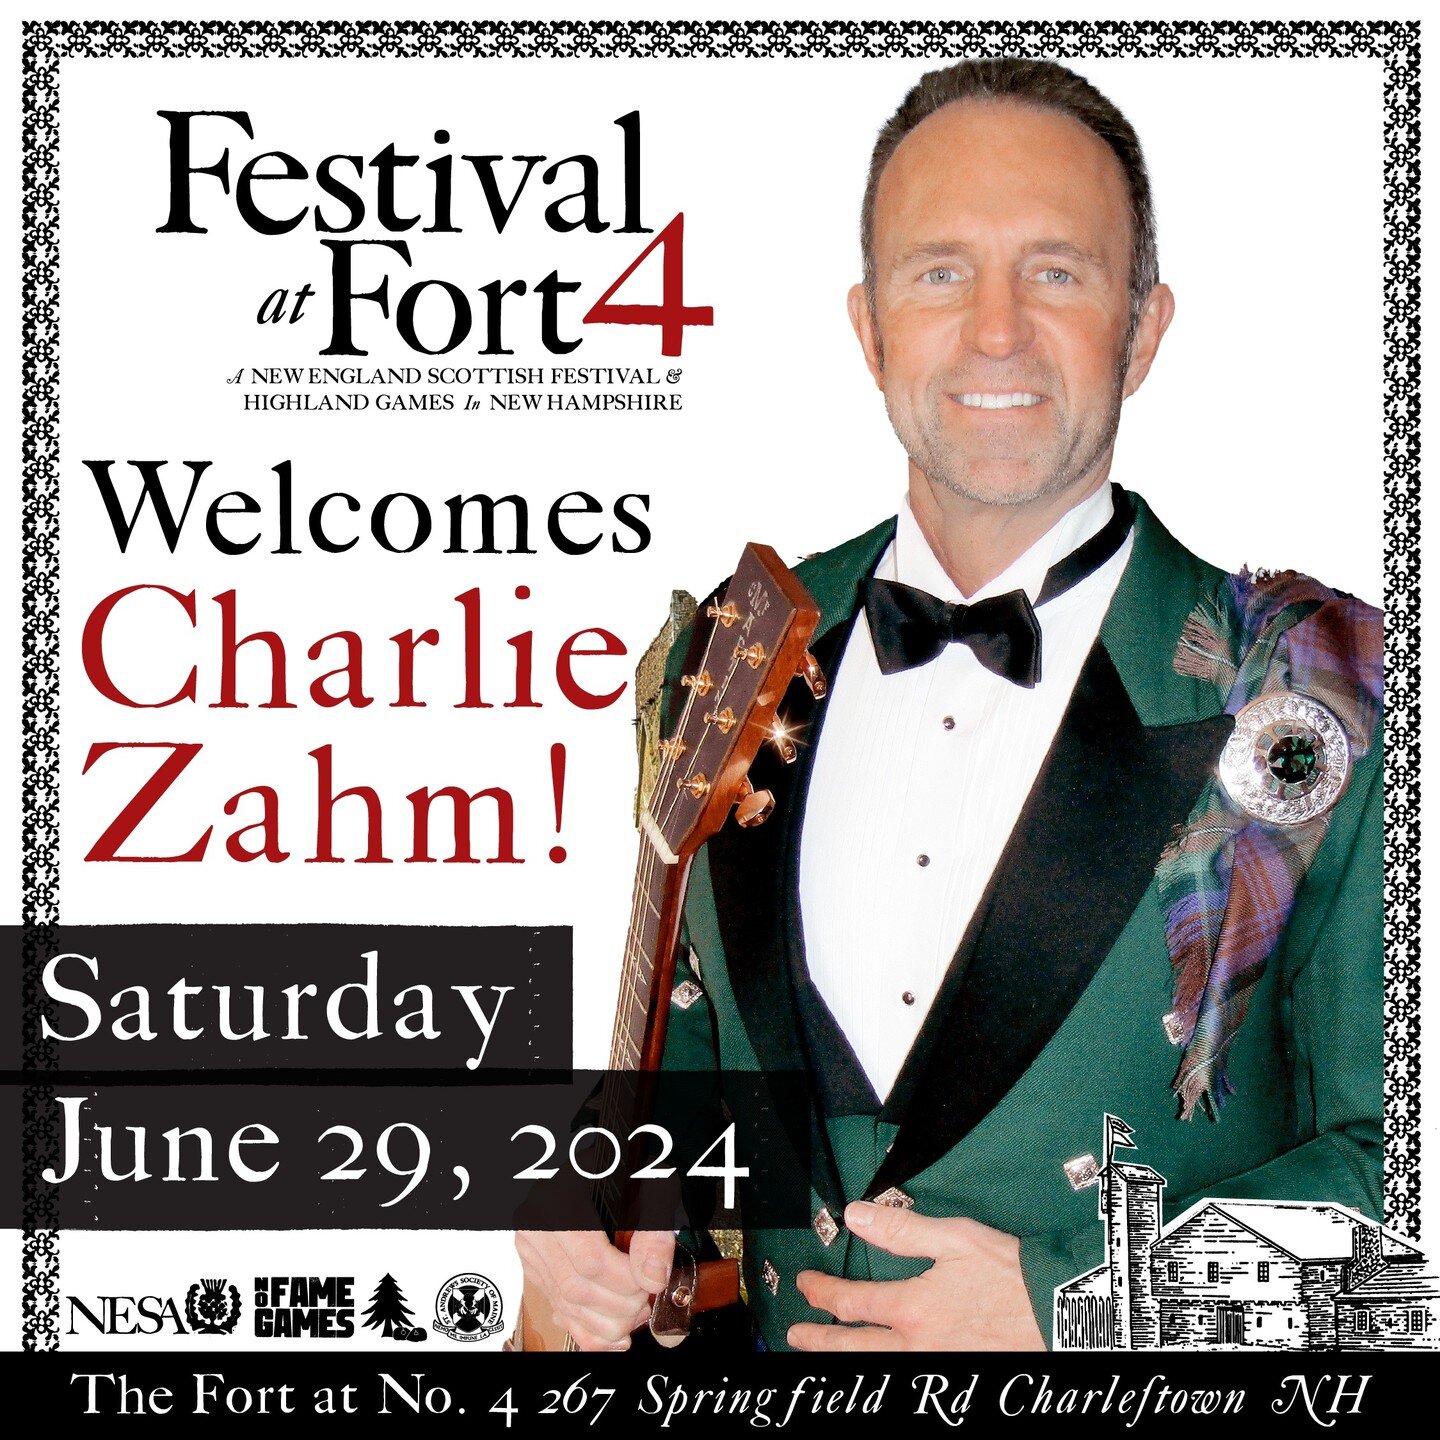 The Festival at Fort 4 welcomes Charlie Zahm to our inaugural festival!
Come watch Charlie, one of the most popular soloists at Celtic music festivals, Maritime, and American Traditional music events anywhere east of the Mississippi preform on the st